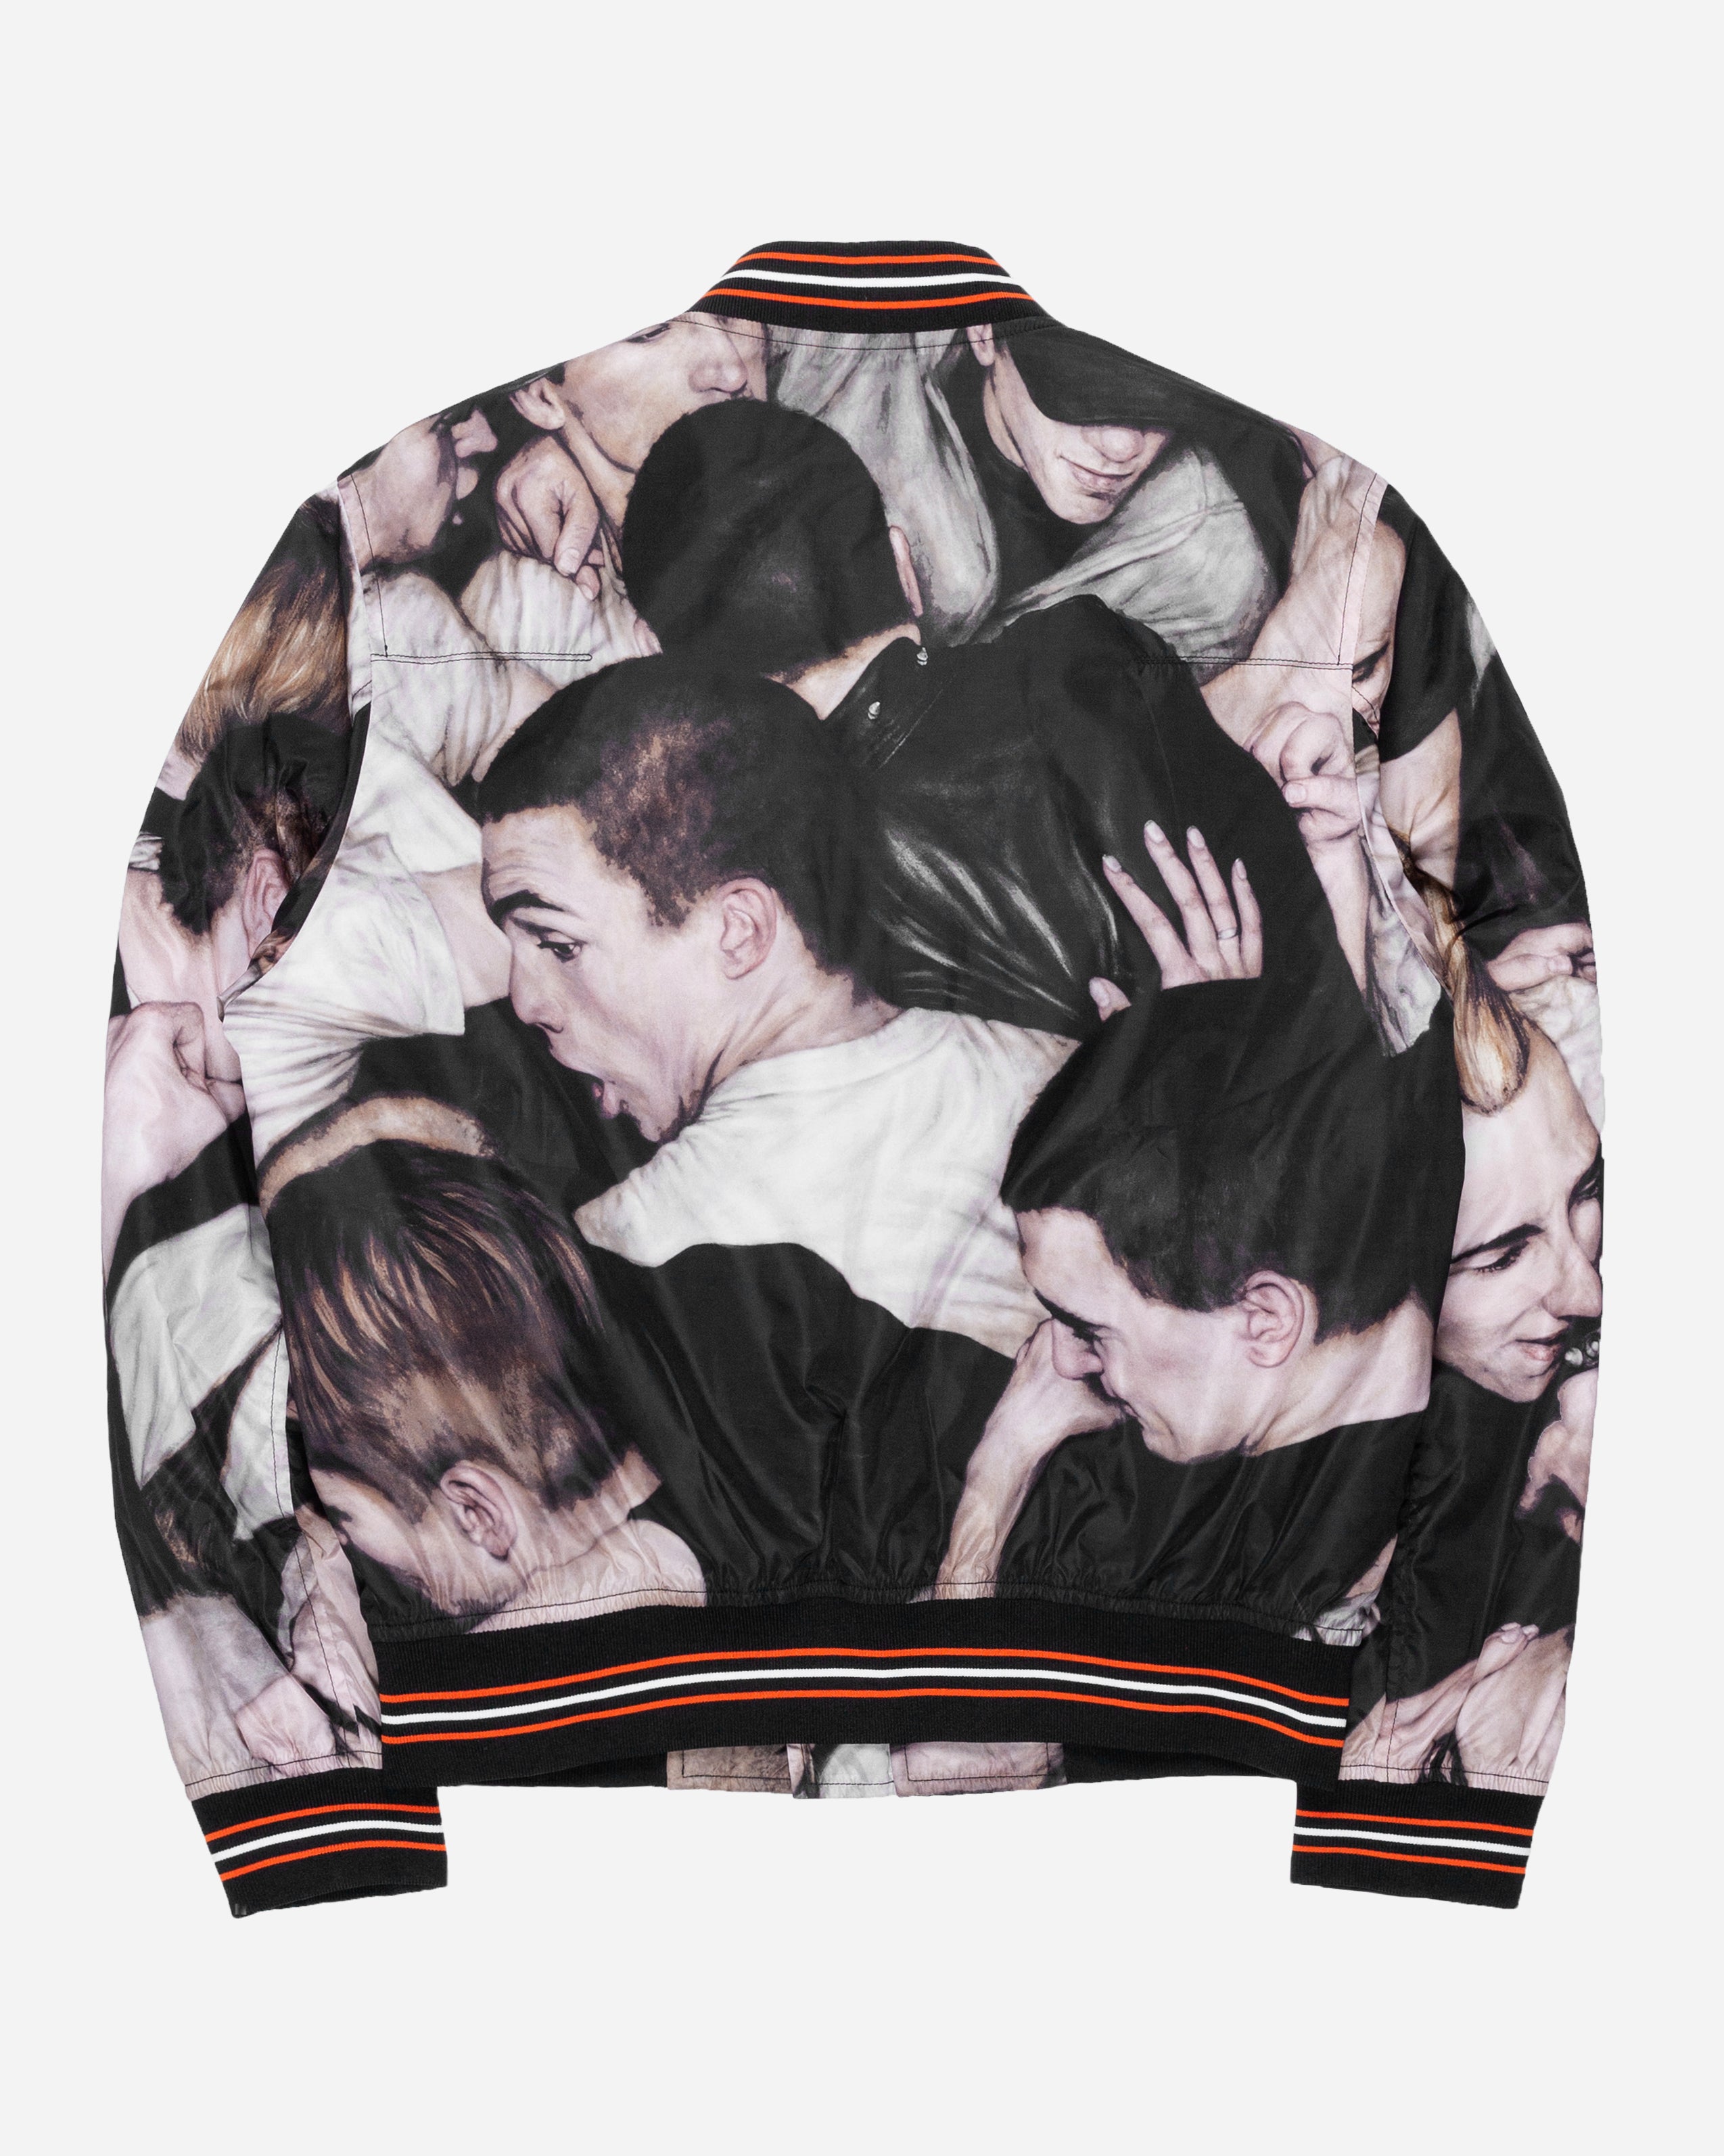 Dior Homme Dan Witz “Mosh Pit” Bomber Jacket - AW17 - SILVER LEAGUE